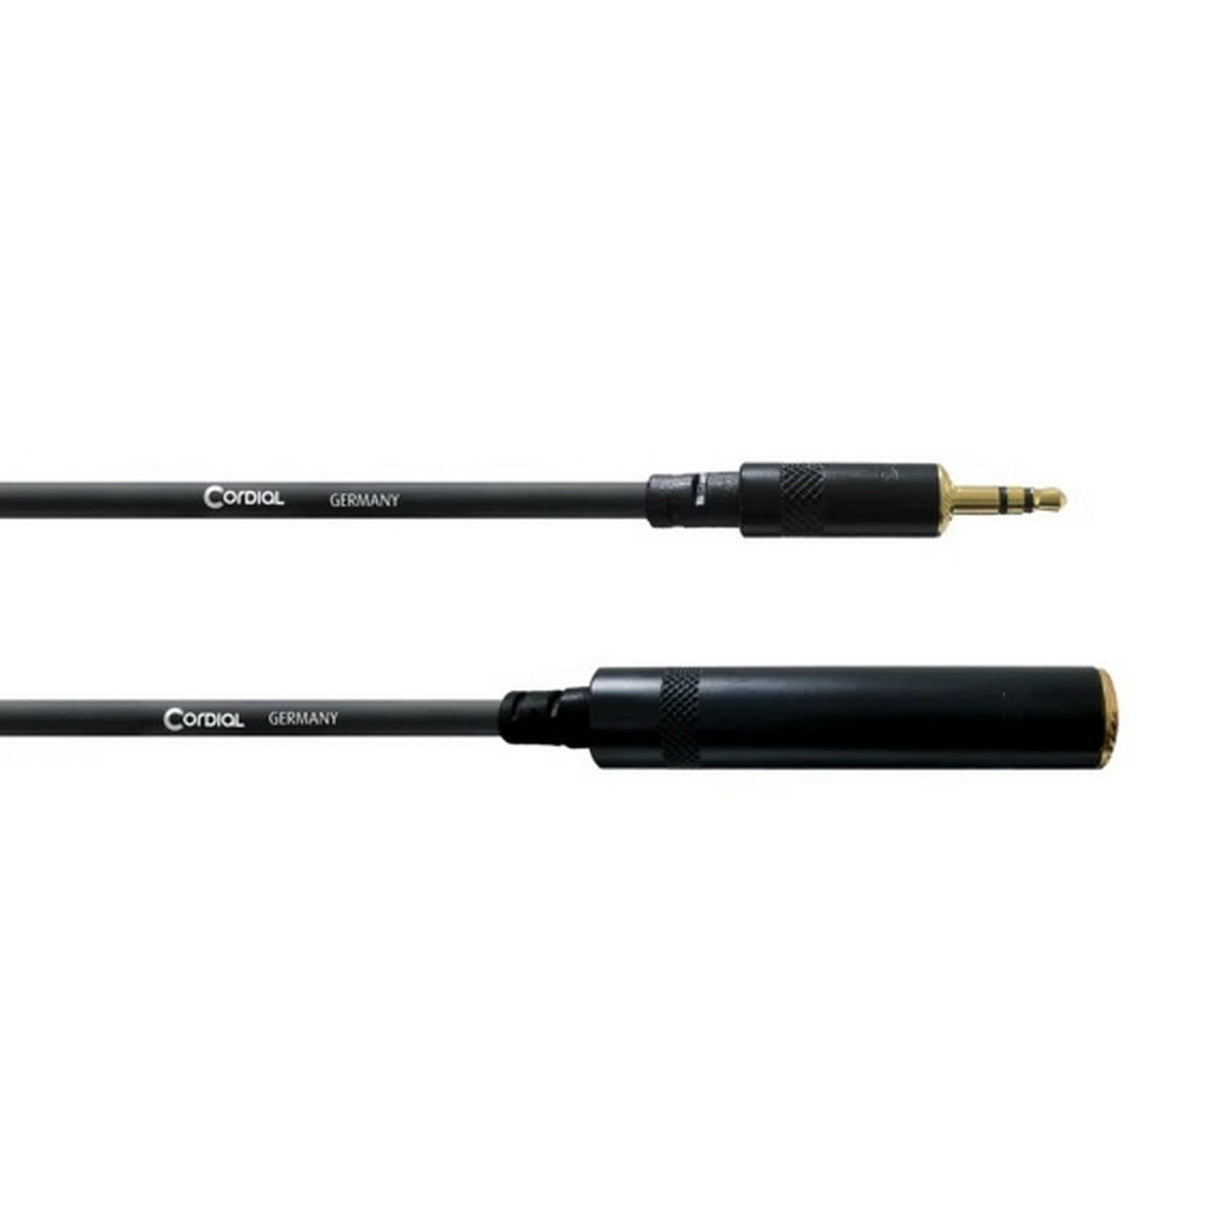 Cordial CFM 3 WK Stereo 1/8-Inch TRS to 1/4-Inch Stereo Female Cable, Black, 10-Feet